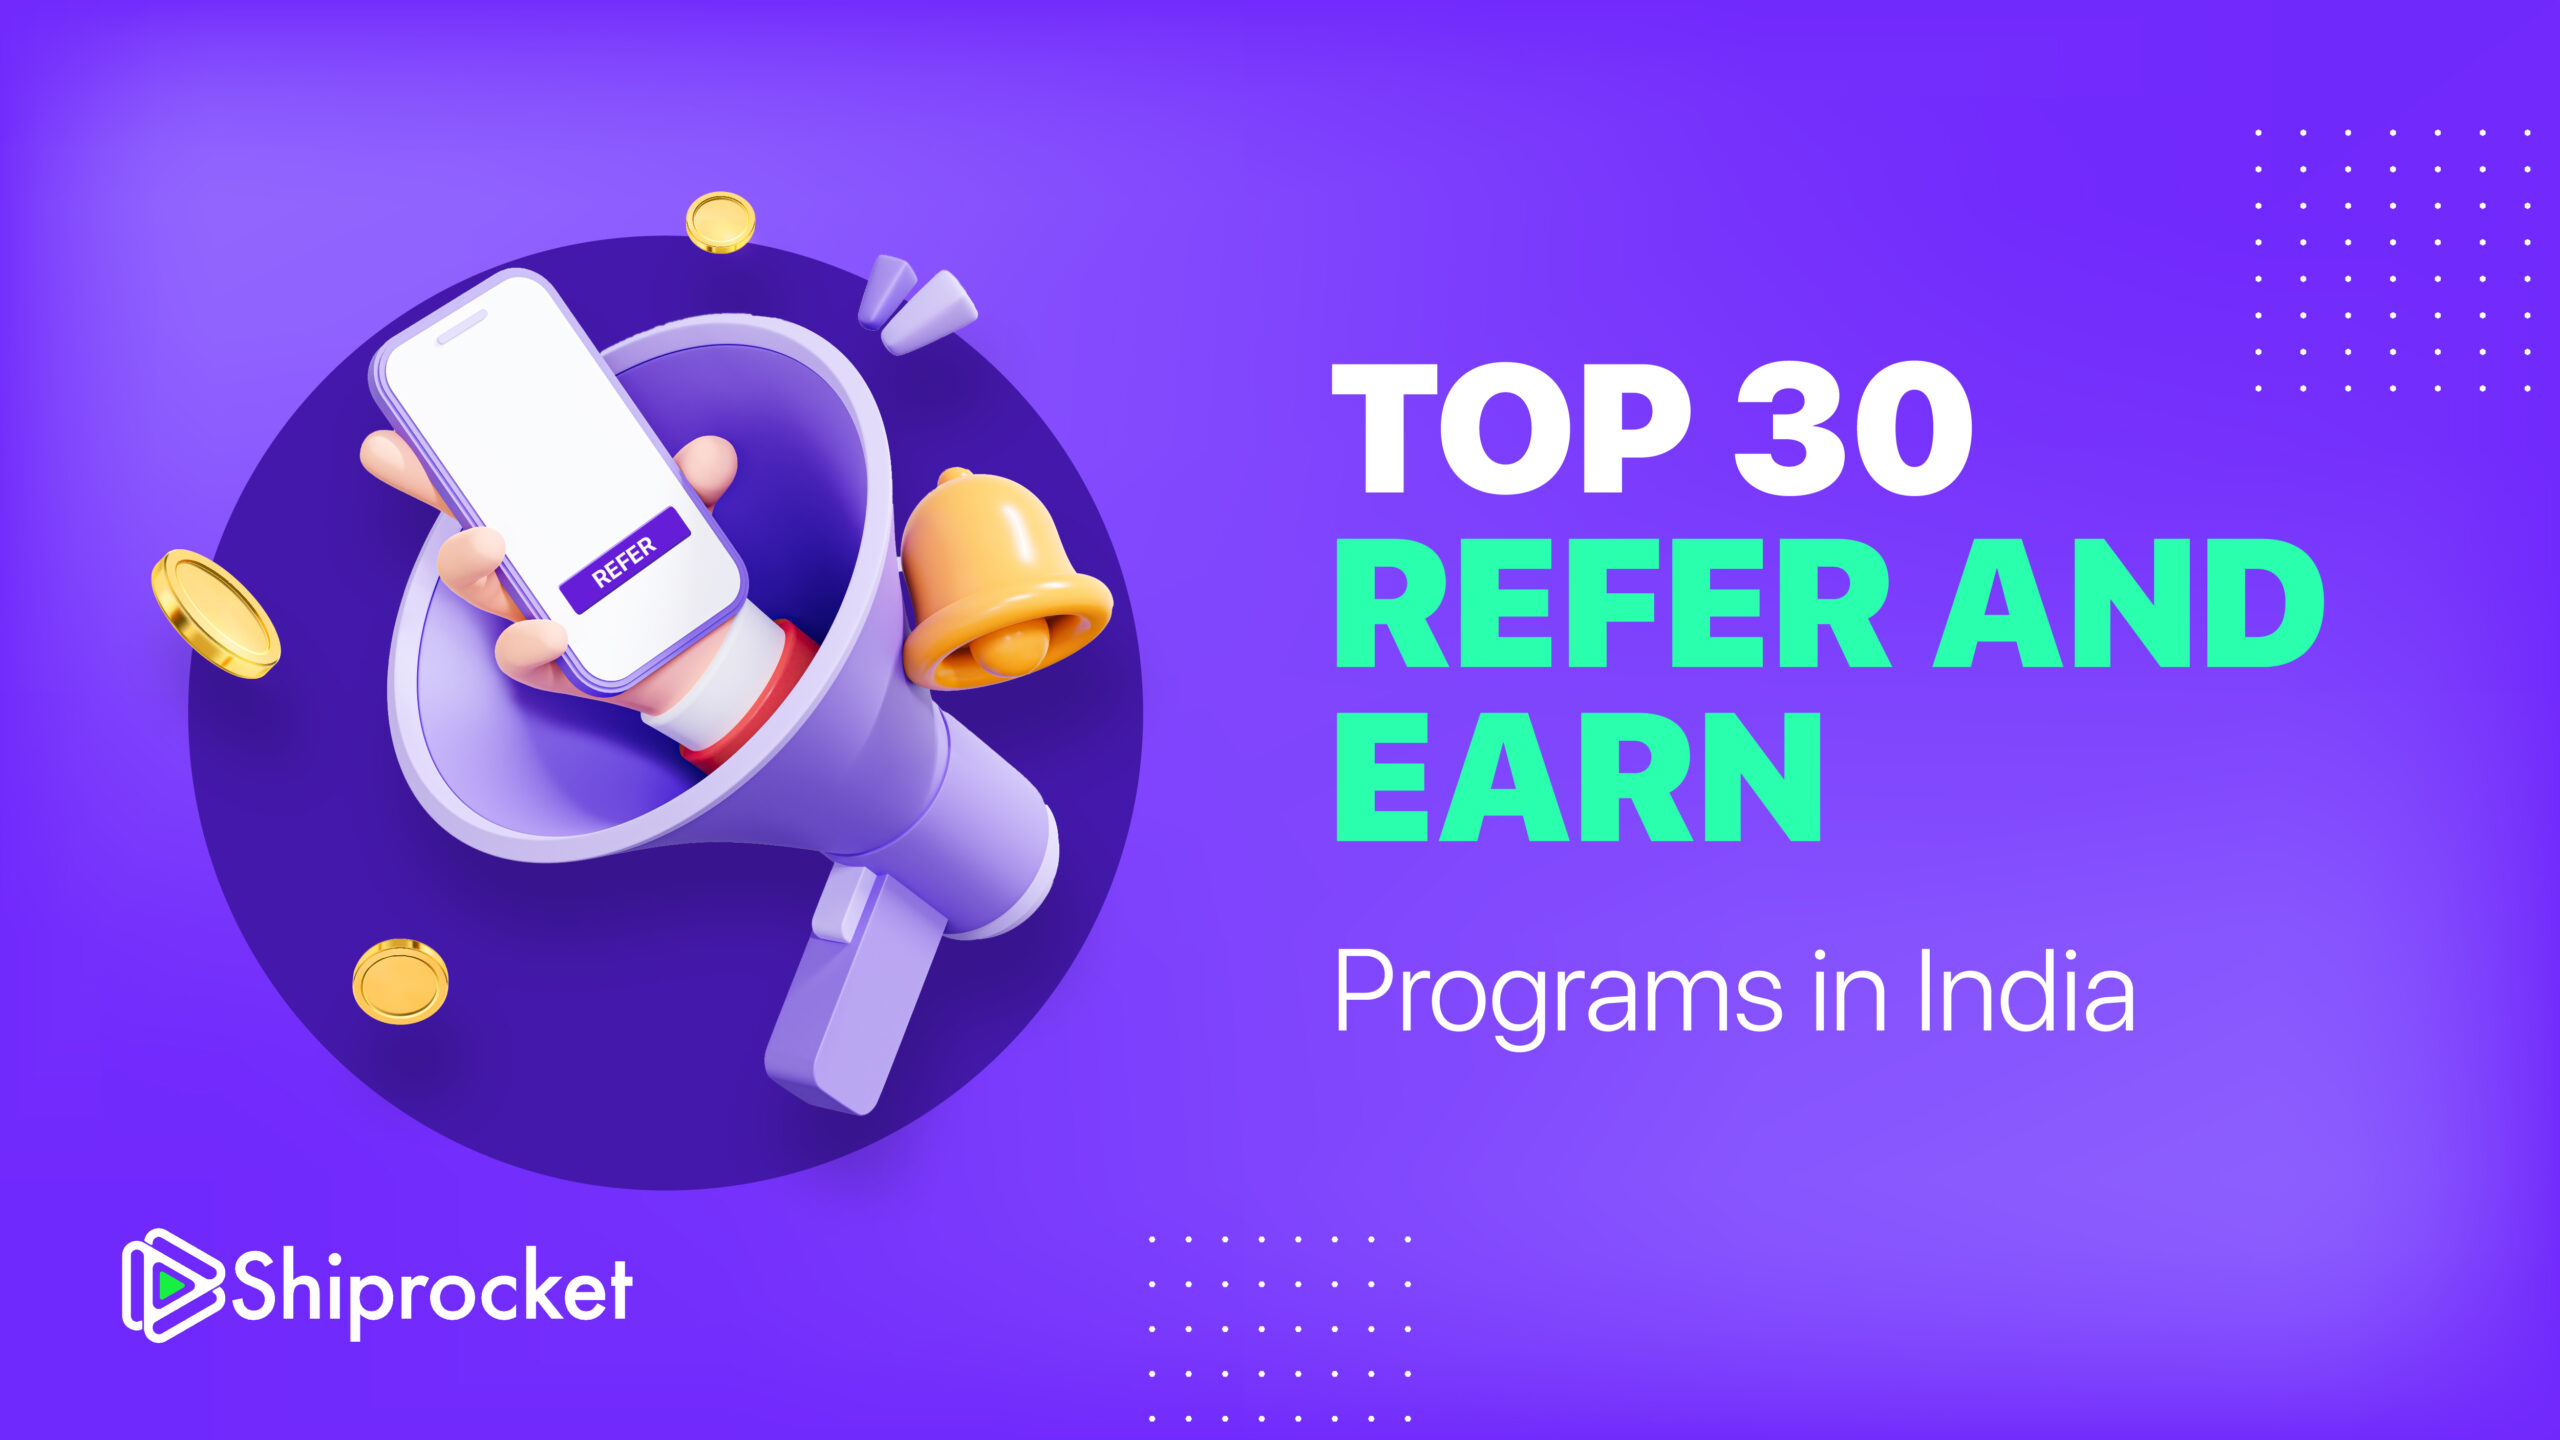 Top 30 Refer and Earn Programs in India